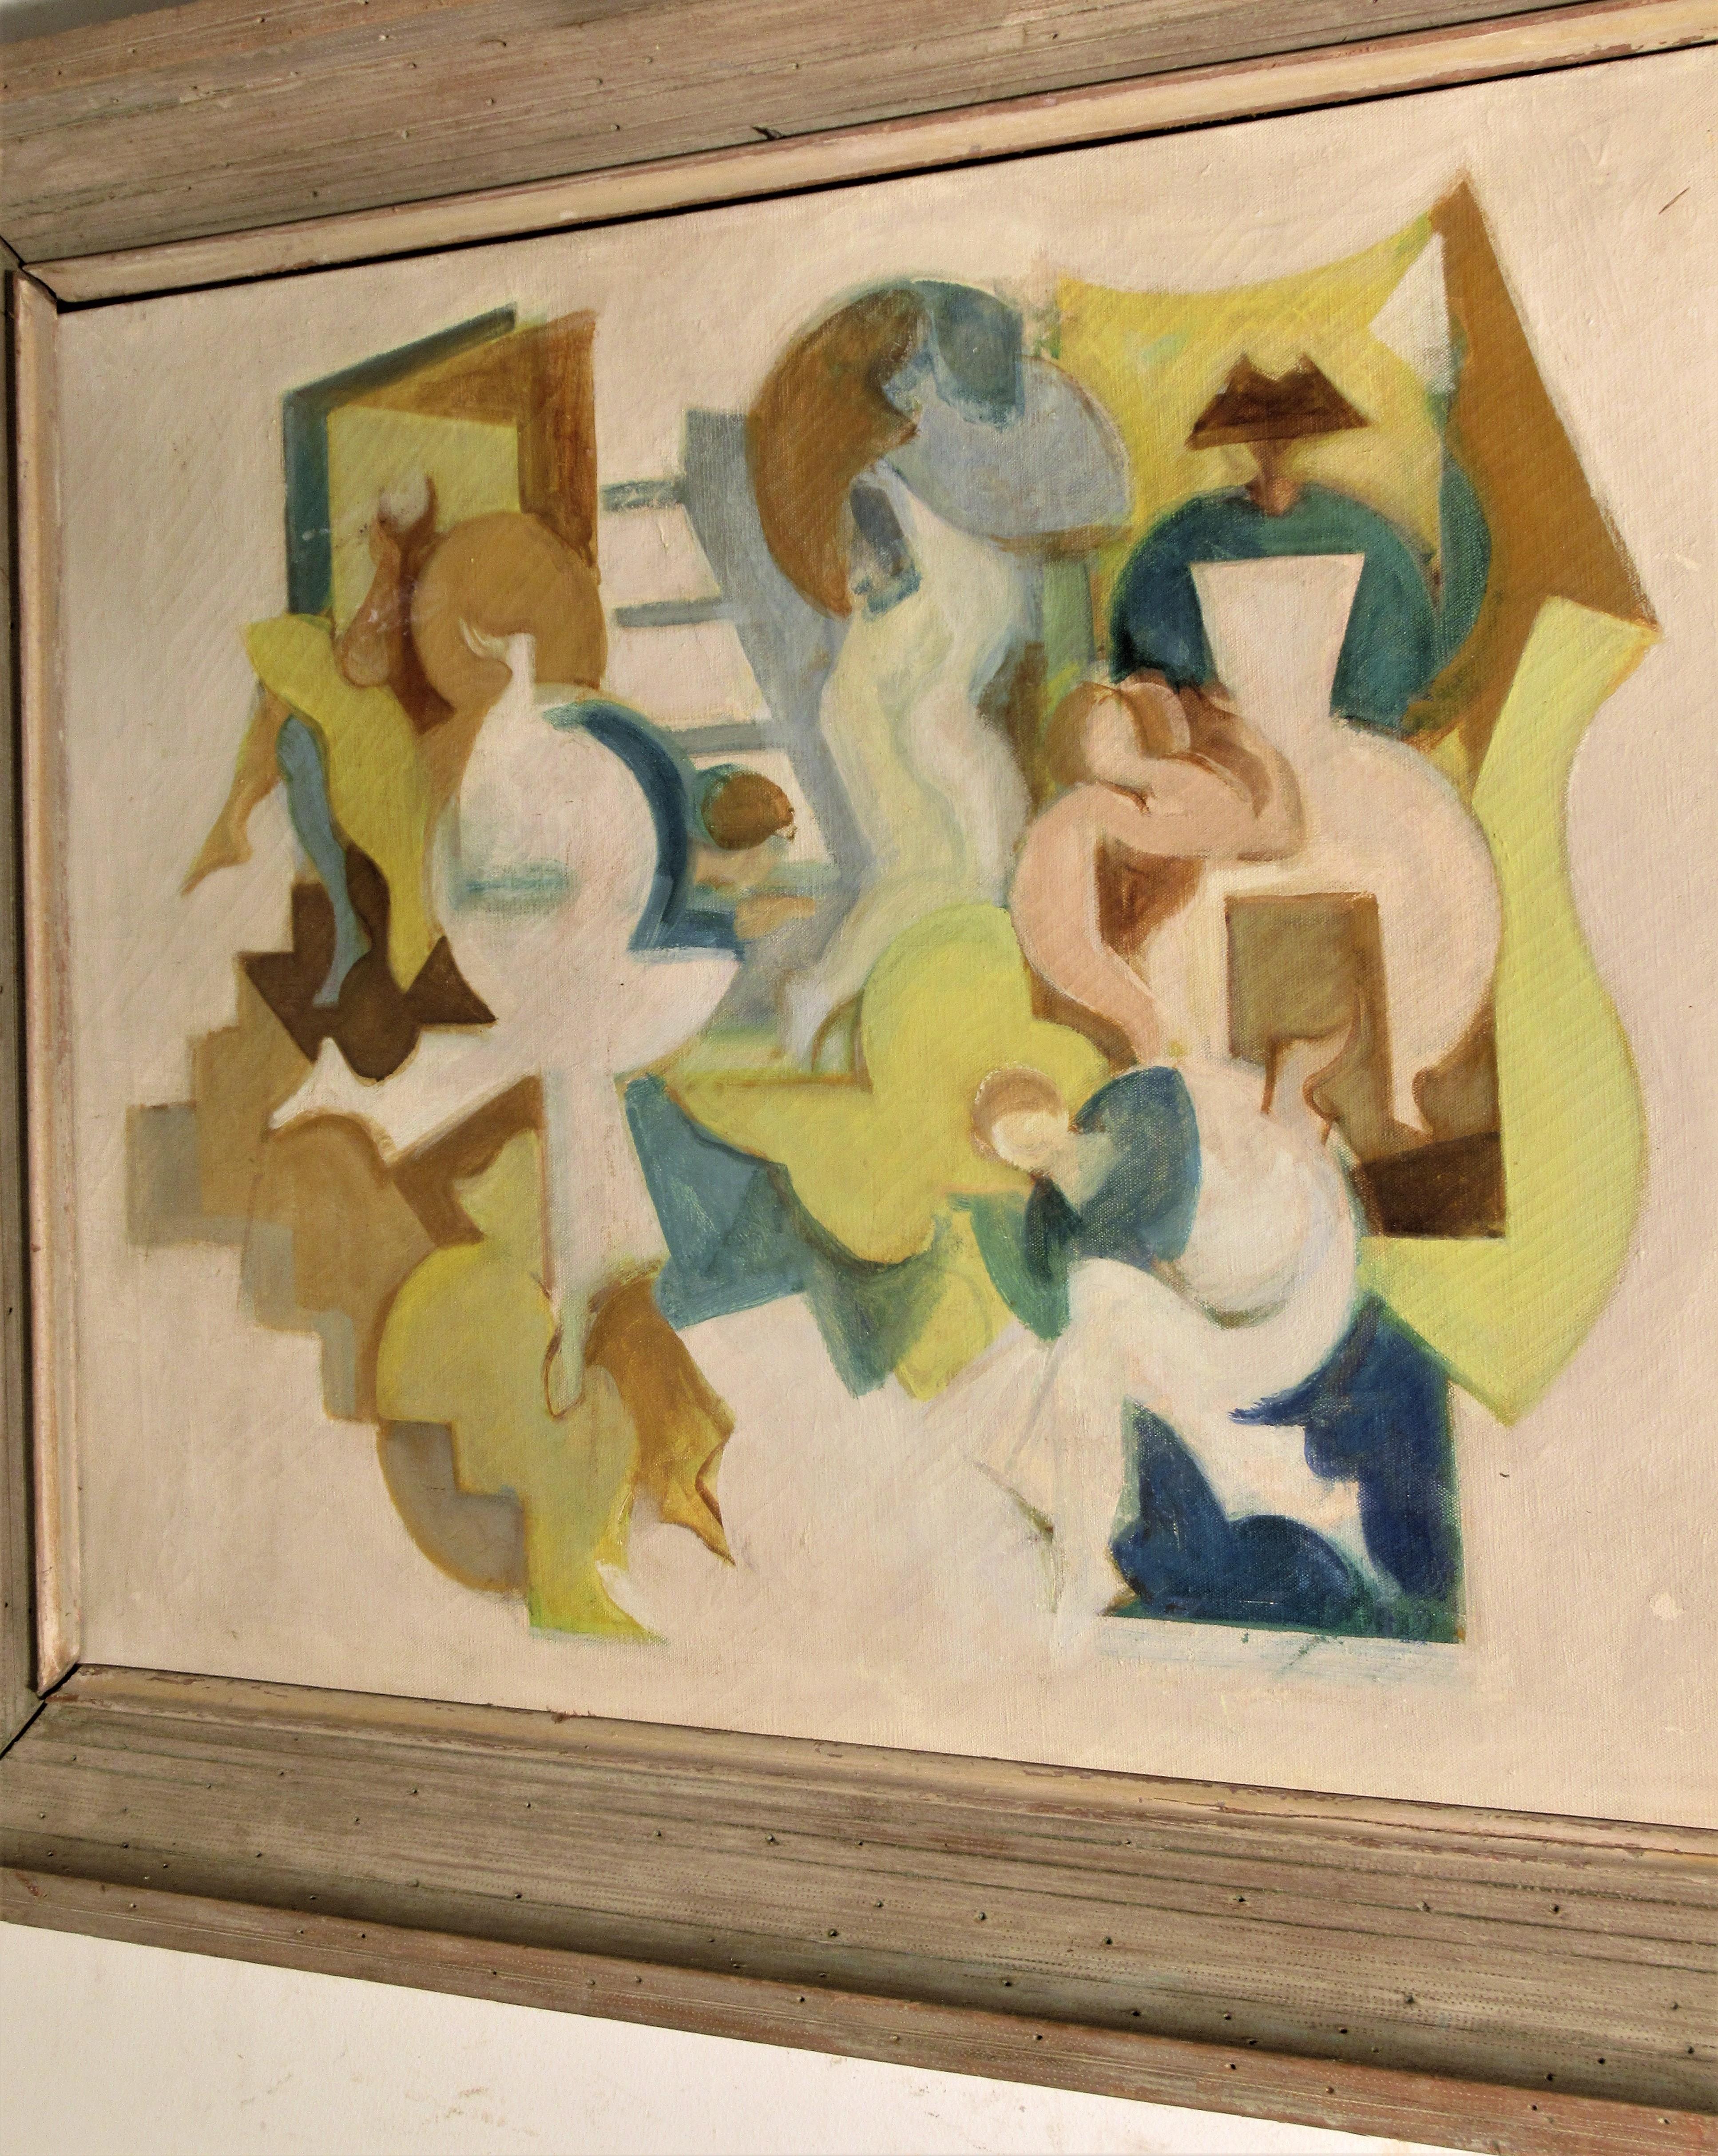 Abstract cubist oil painting on canvas of interior scene with female figures. Set in beautiful period wood frame, circa 1940s. Framed measurements are 32